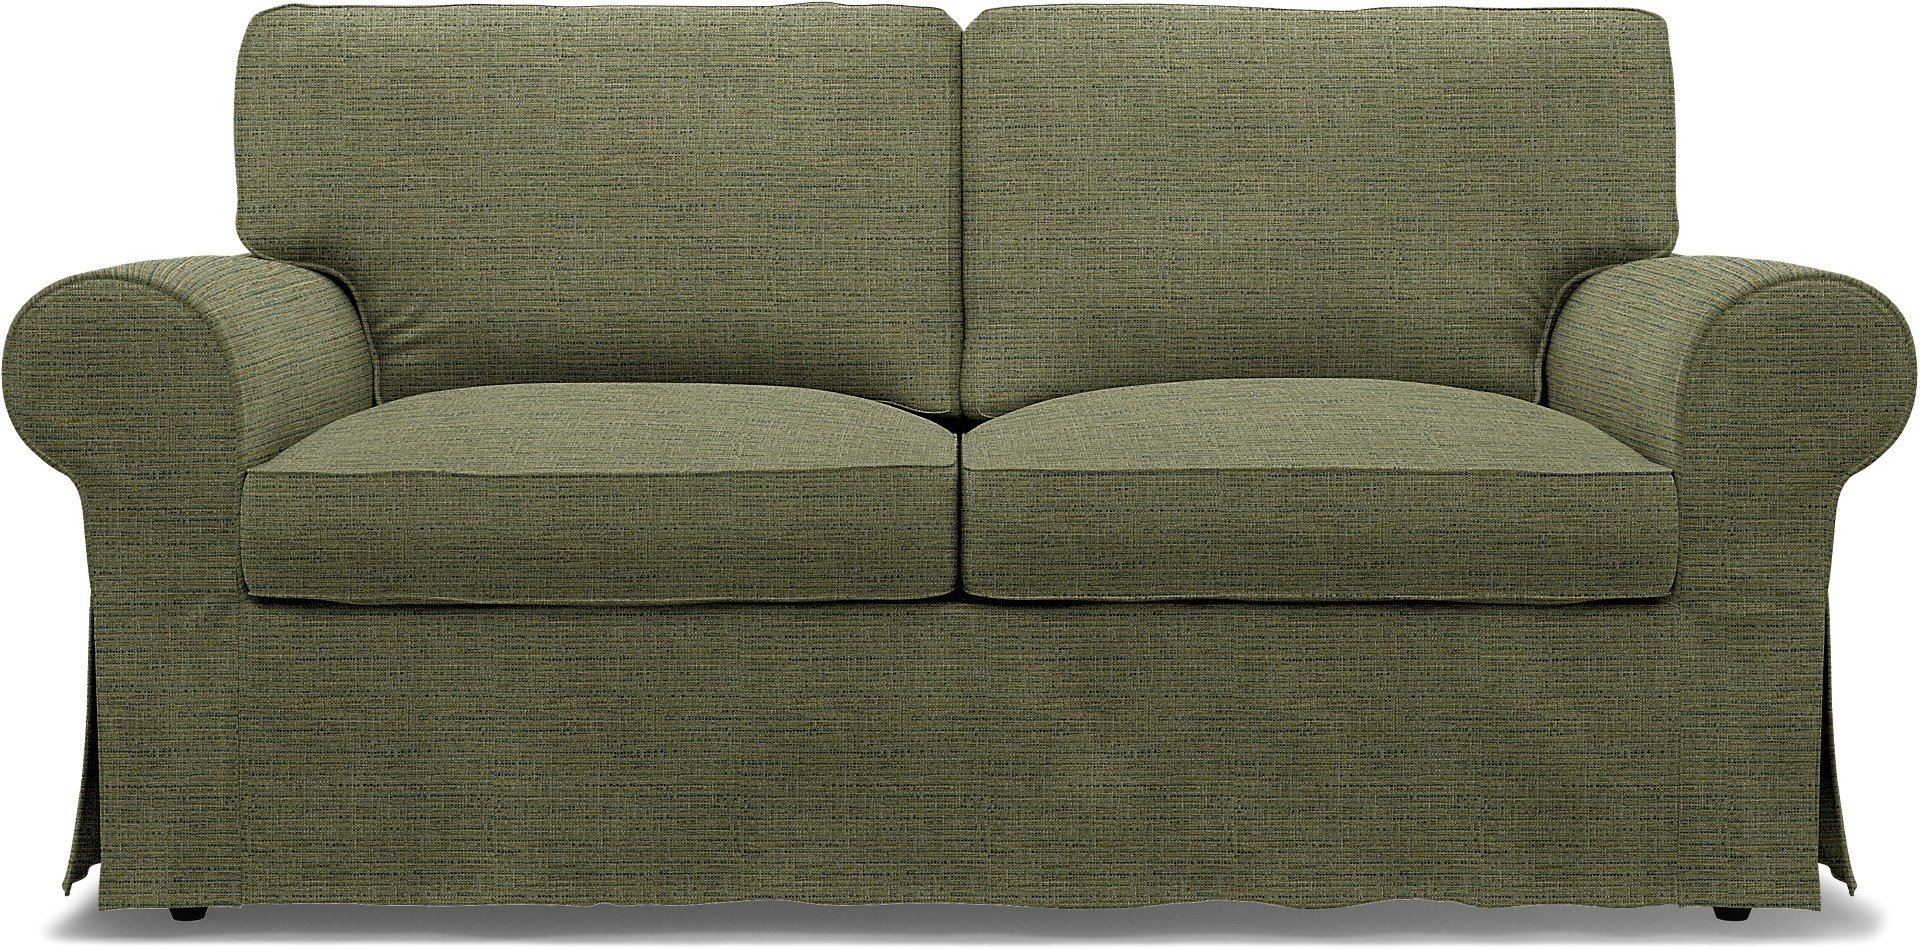 IKEA - Ektorp 2 Seater Sofa Bed Cover, Meadow Green, Boucle & Texture - Bemz